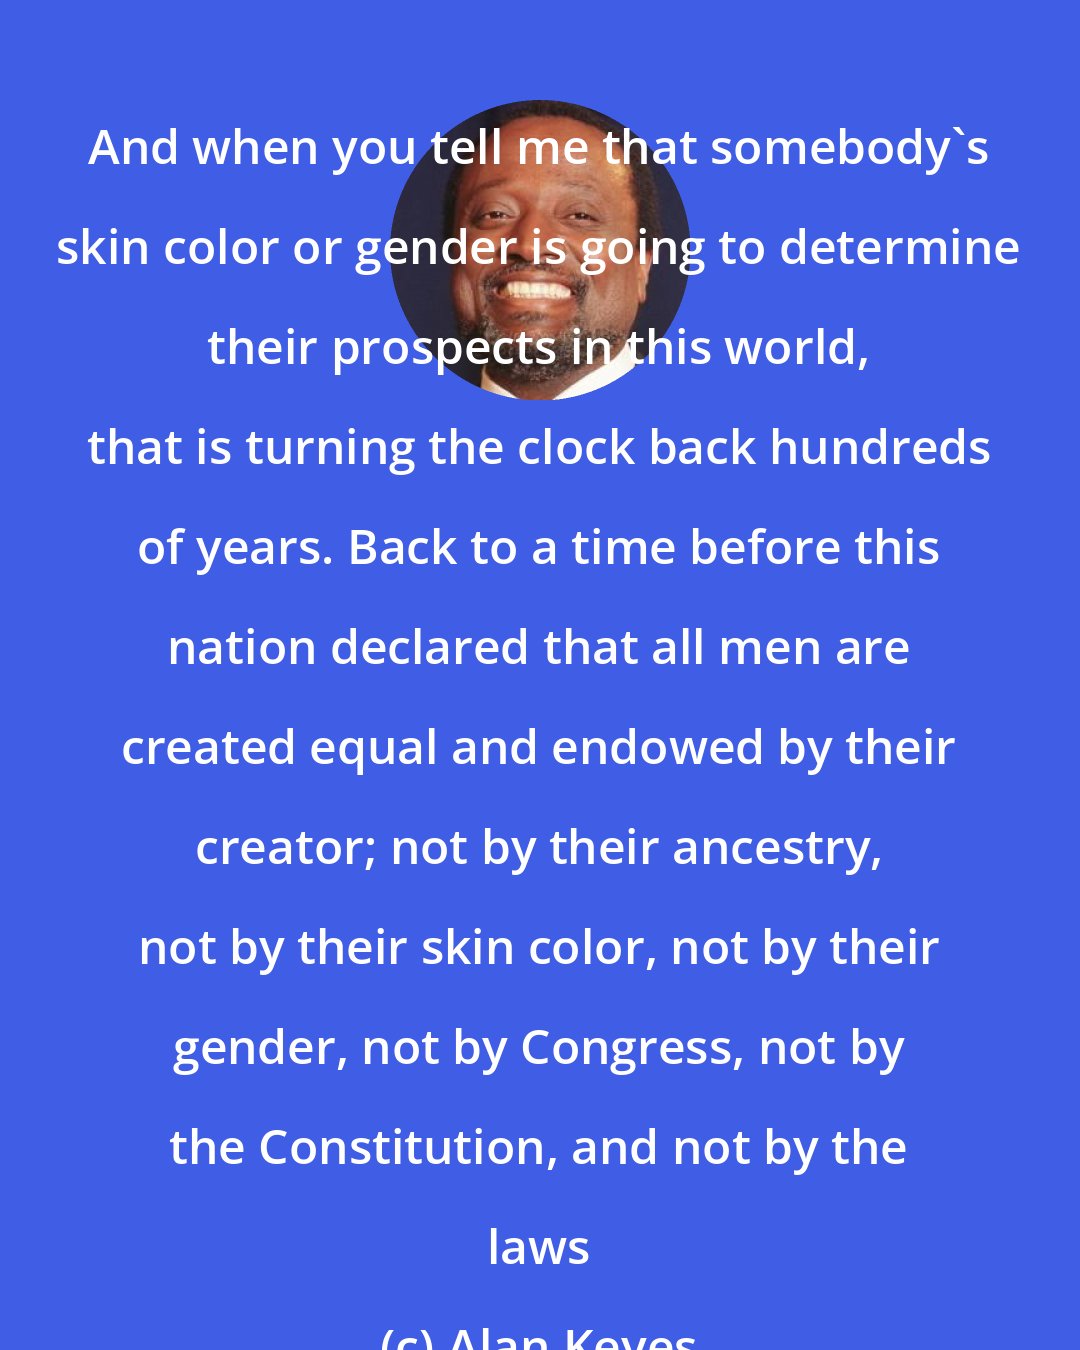 Alan Keyes: And when you tell me that somebody's skin color or gender is going to determine their prospects in this world, that is turning the clock back hundreds of years. Back to a time before this nation declared that all men are created equal and endowed by their creator; not by their ancestry, not by their skin color, not by their gender, not by Congress, not by the Constitution, and not by the laws